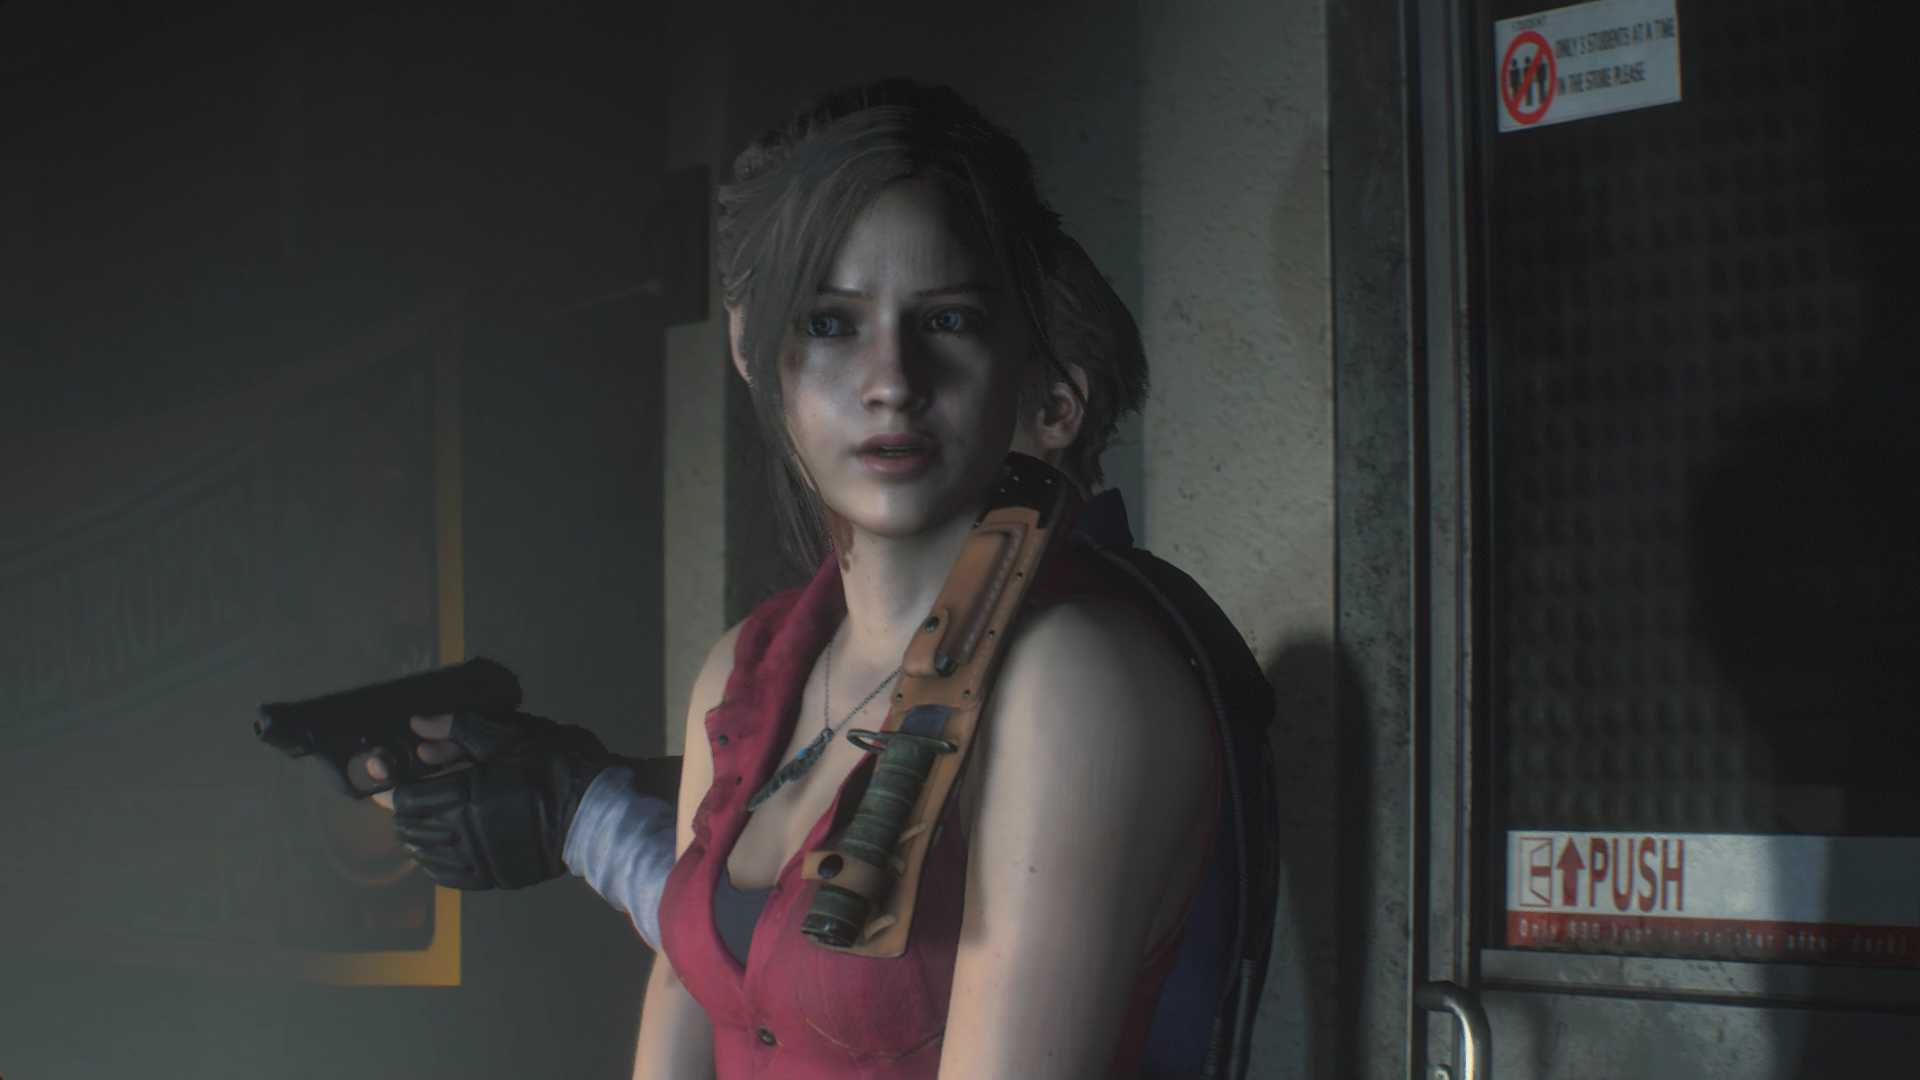 Resident evil e actress Jill Valentine FULL HD wallpapers - IndianDeal